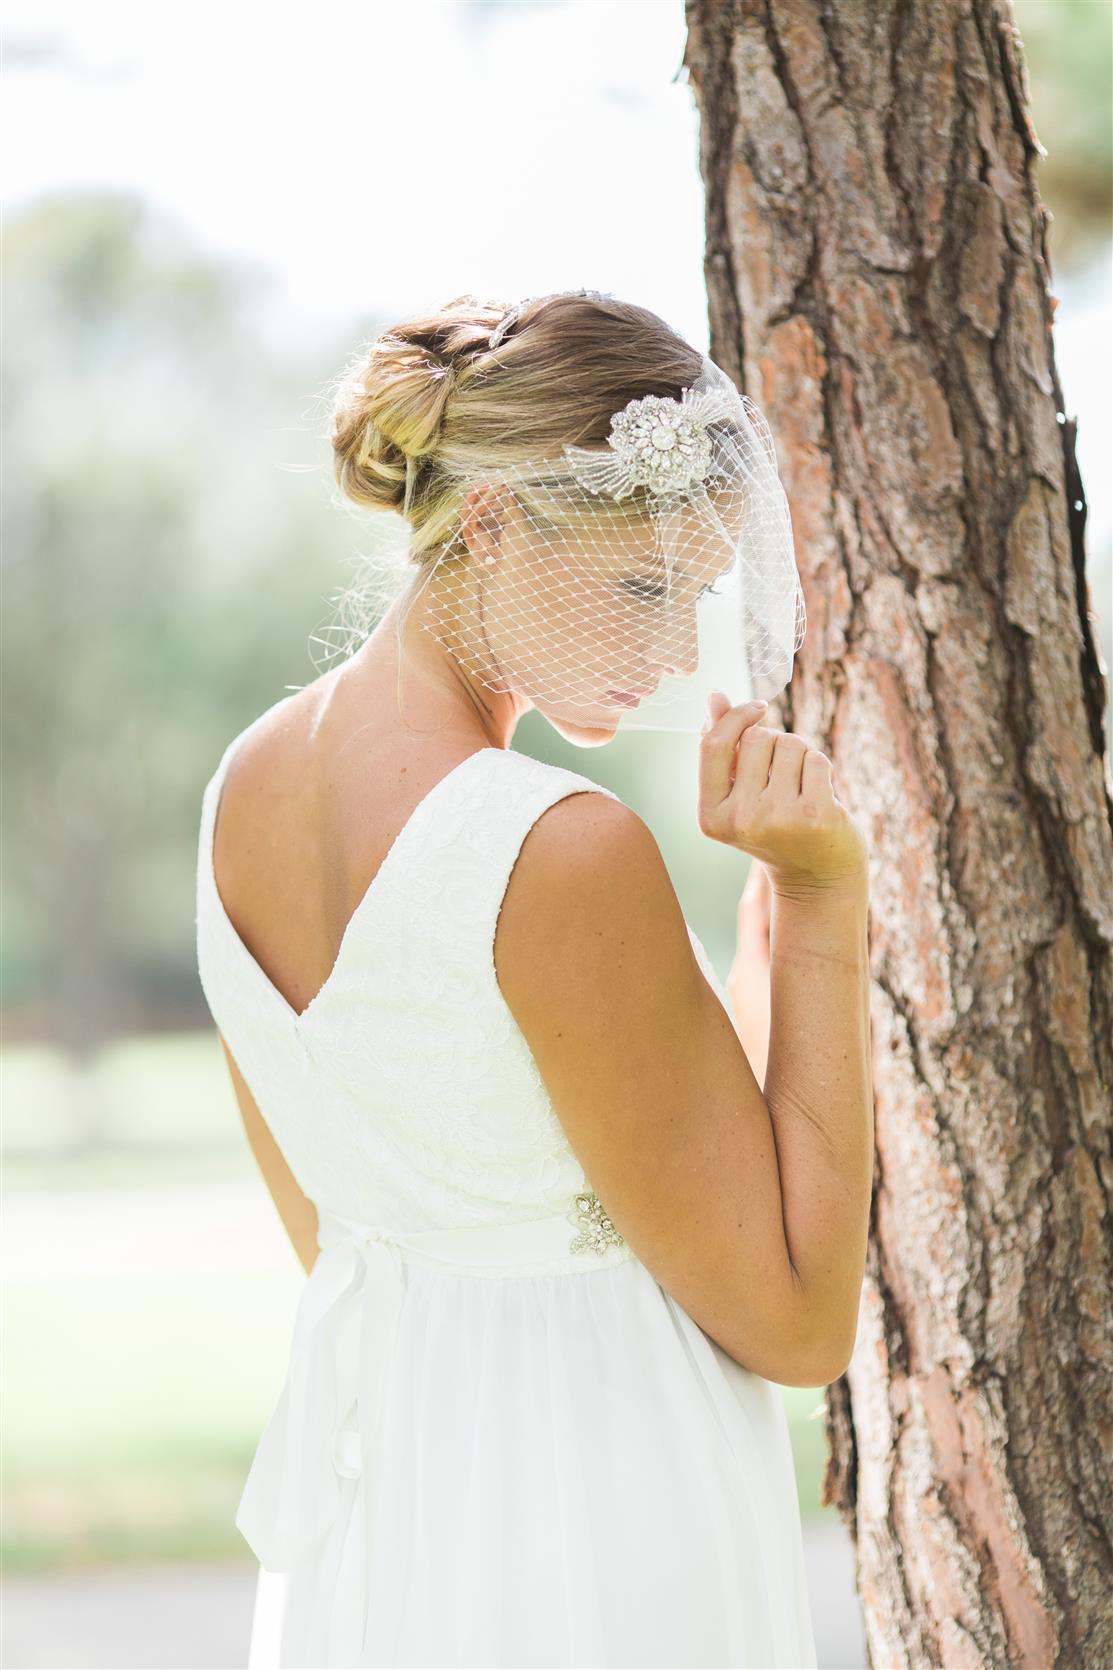 Maelle Bridal Veil Hair Accessory from Nestina Accessories 2015 Collection